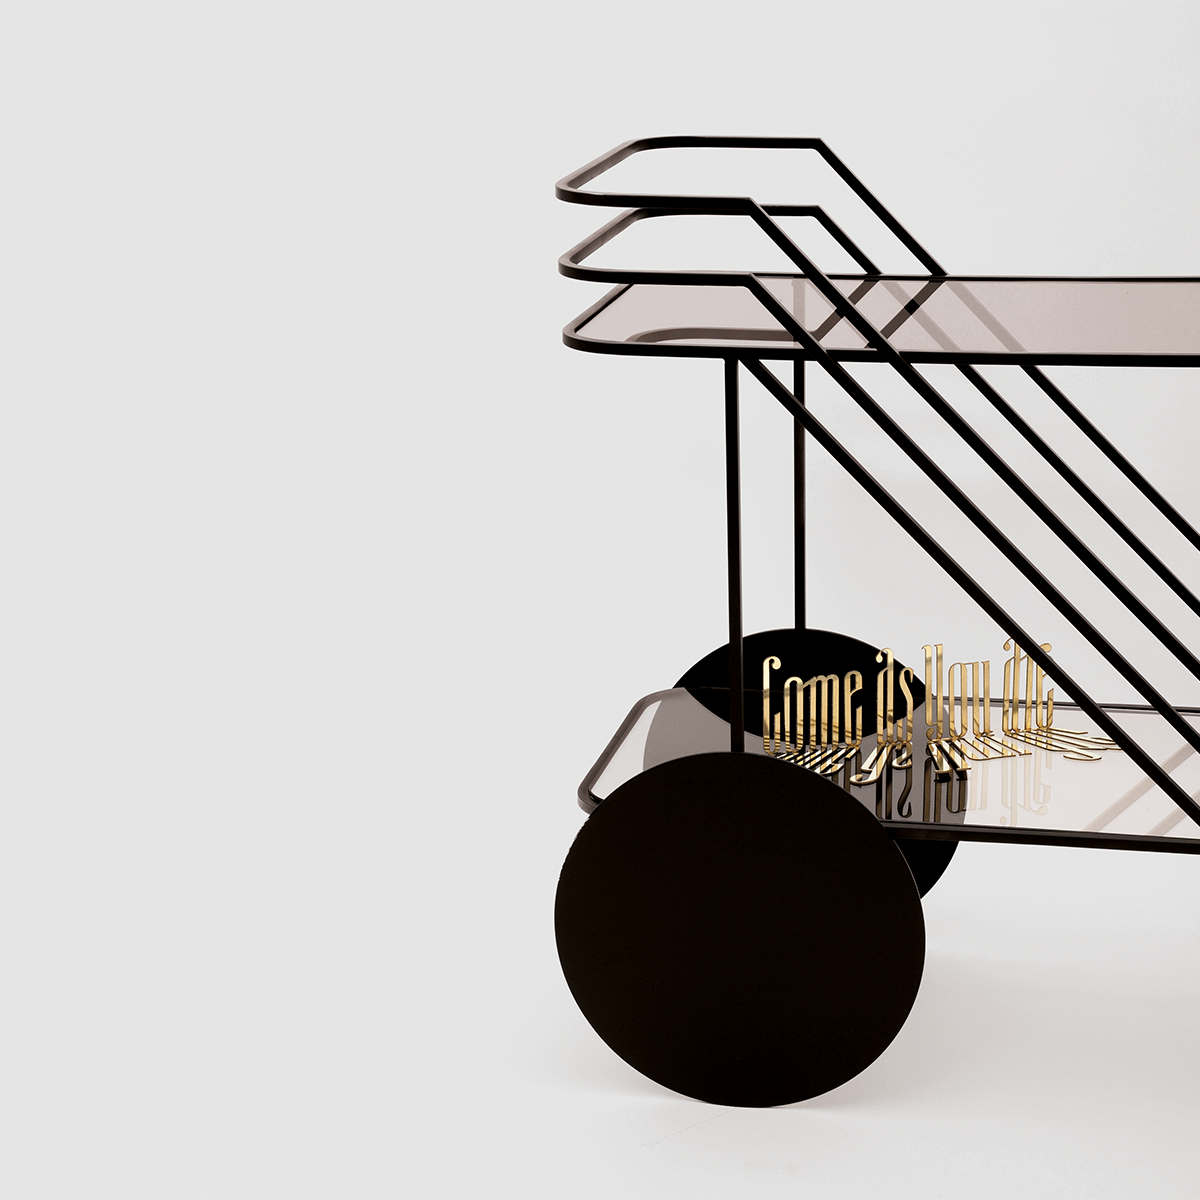 Come As You Are bar cart in black by Christophe de la Fontaine for DANTE - Goods and Bads